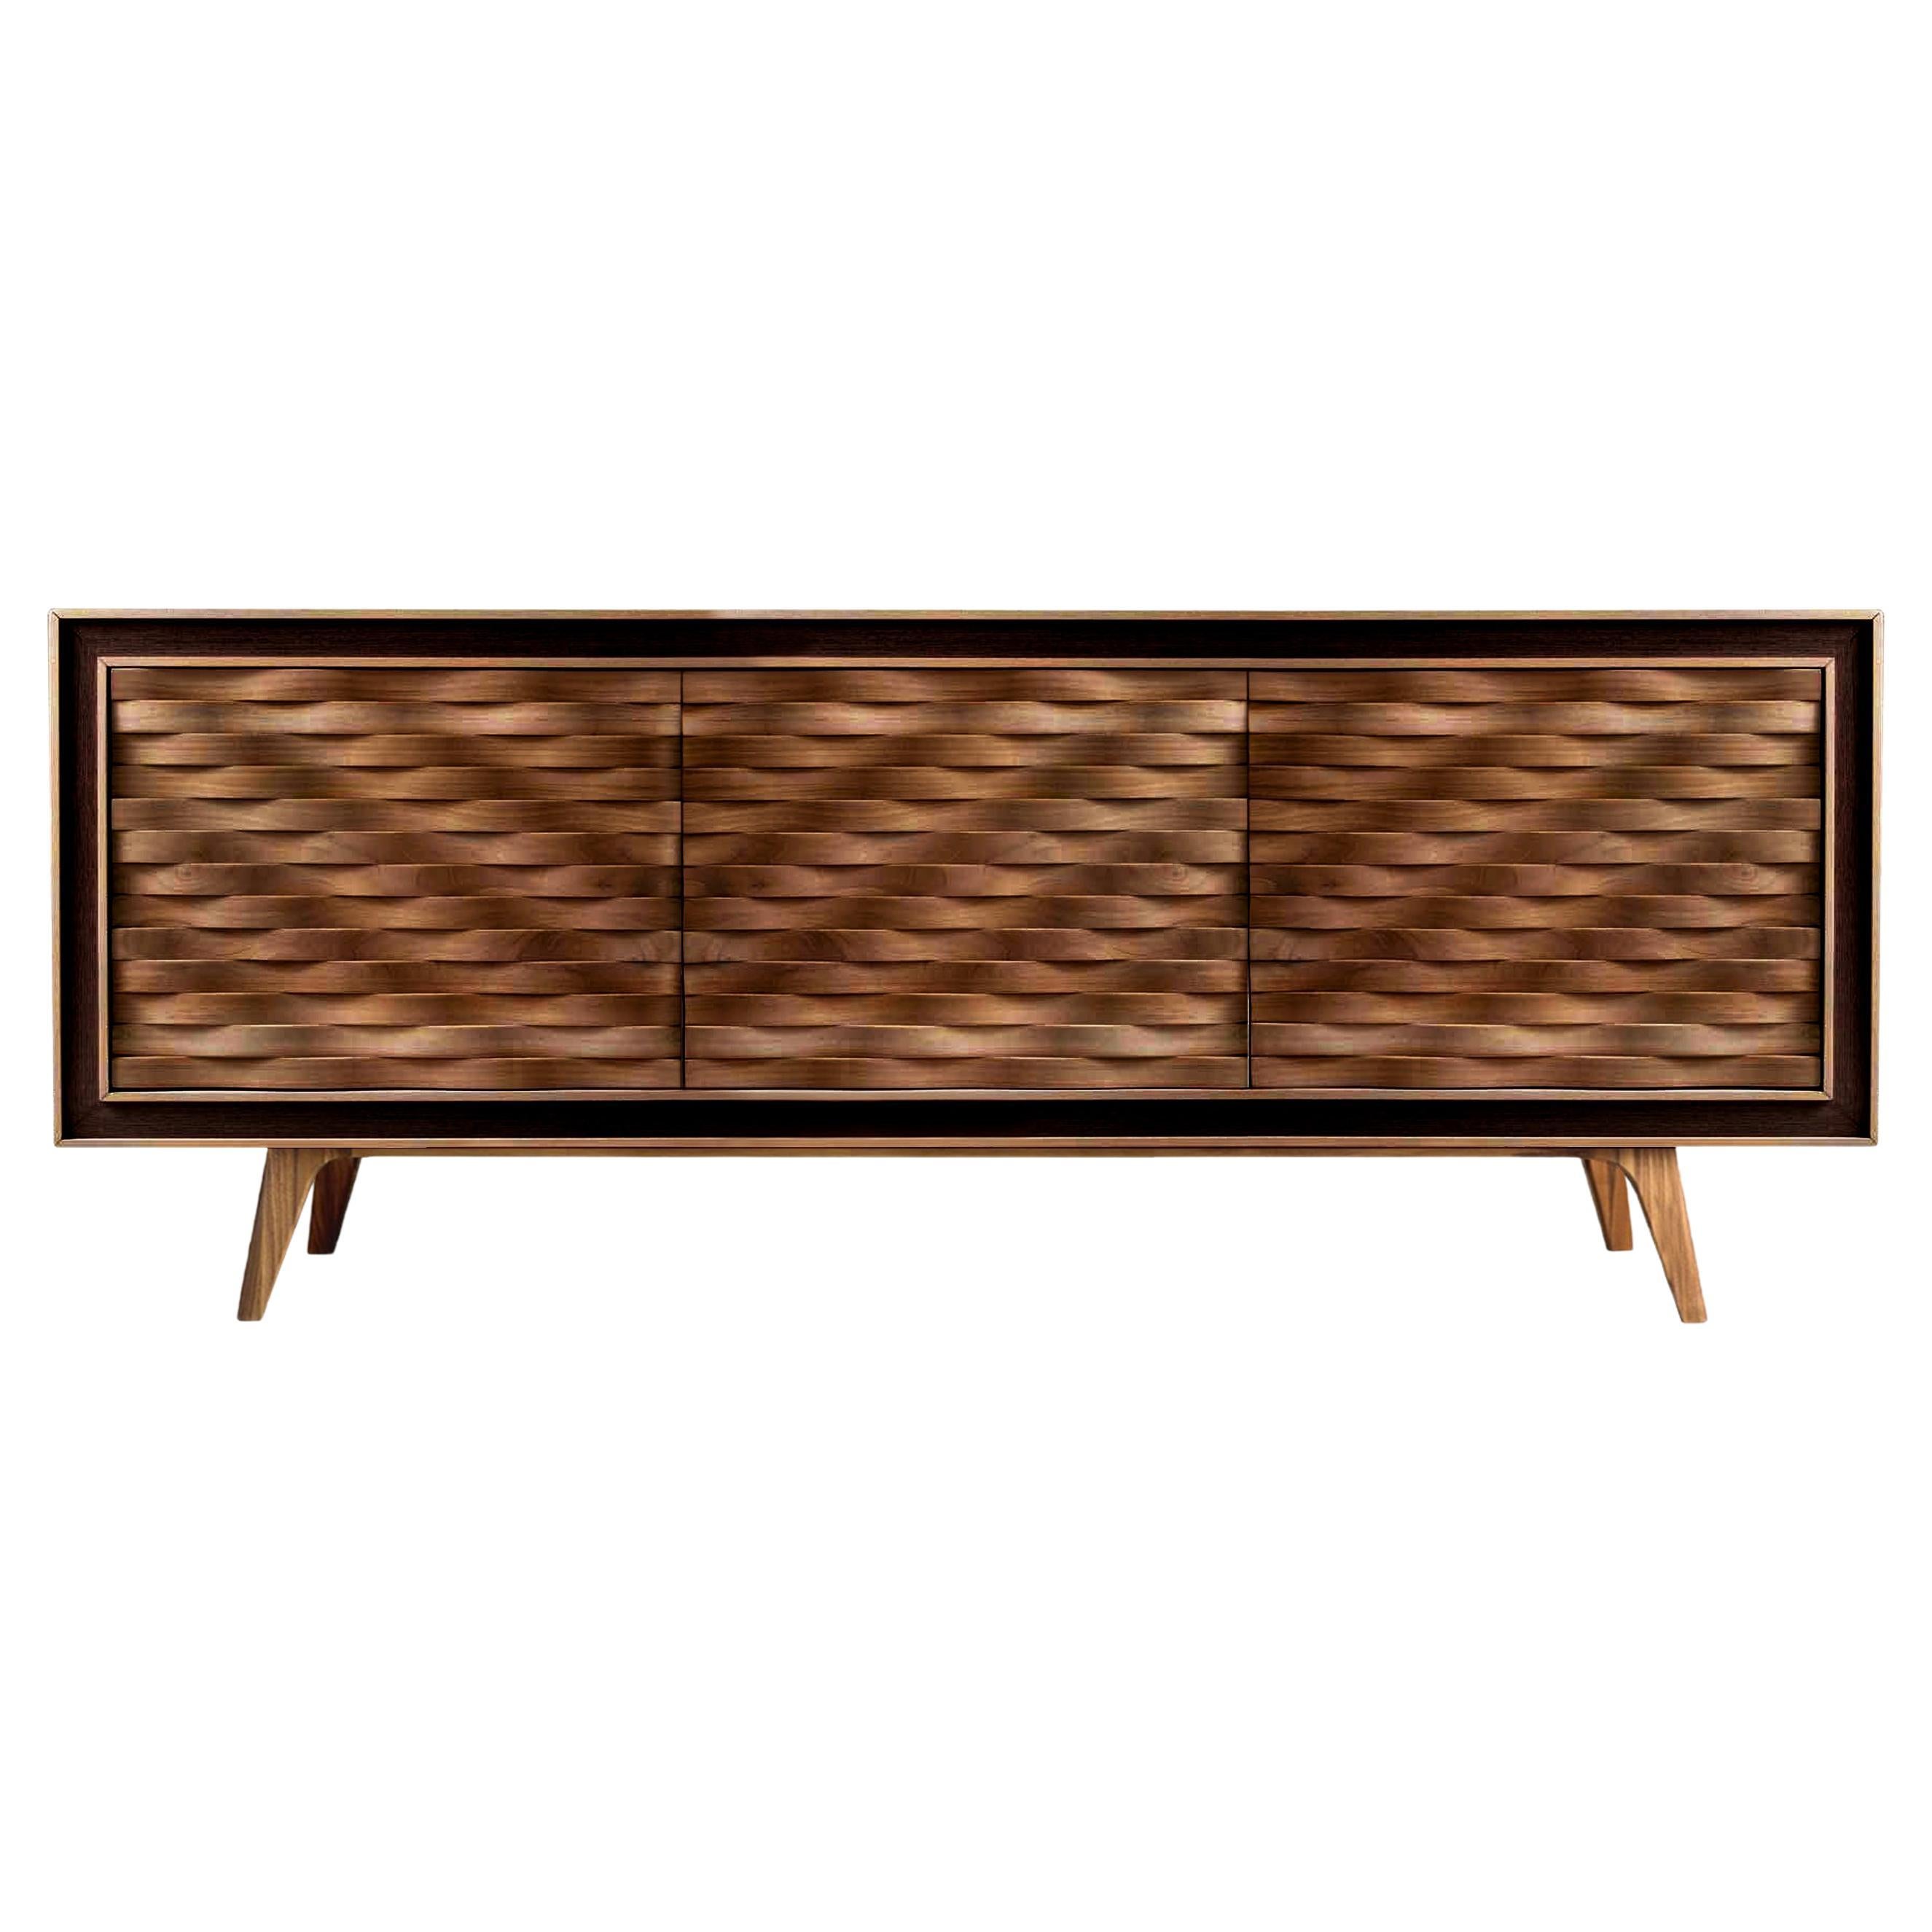 Quadra Nastro Solid Wood Sideboard, Walnut in Natural Finish, Contemporary For Sale